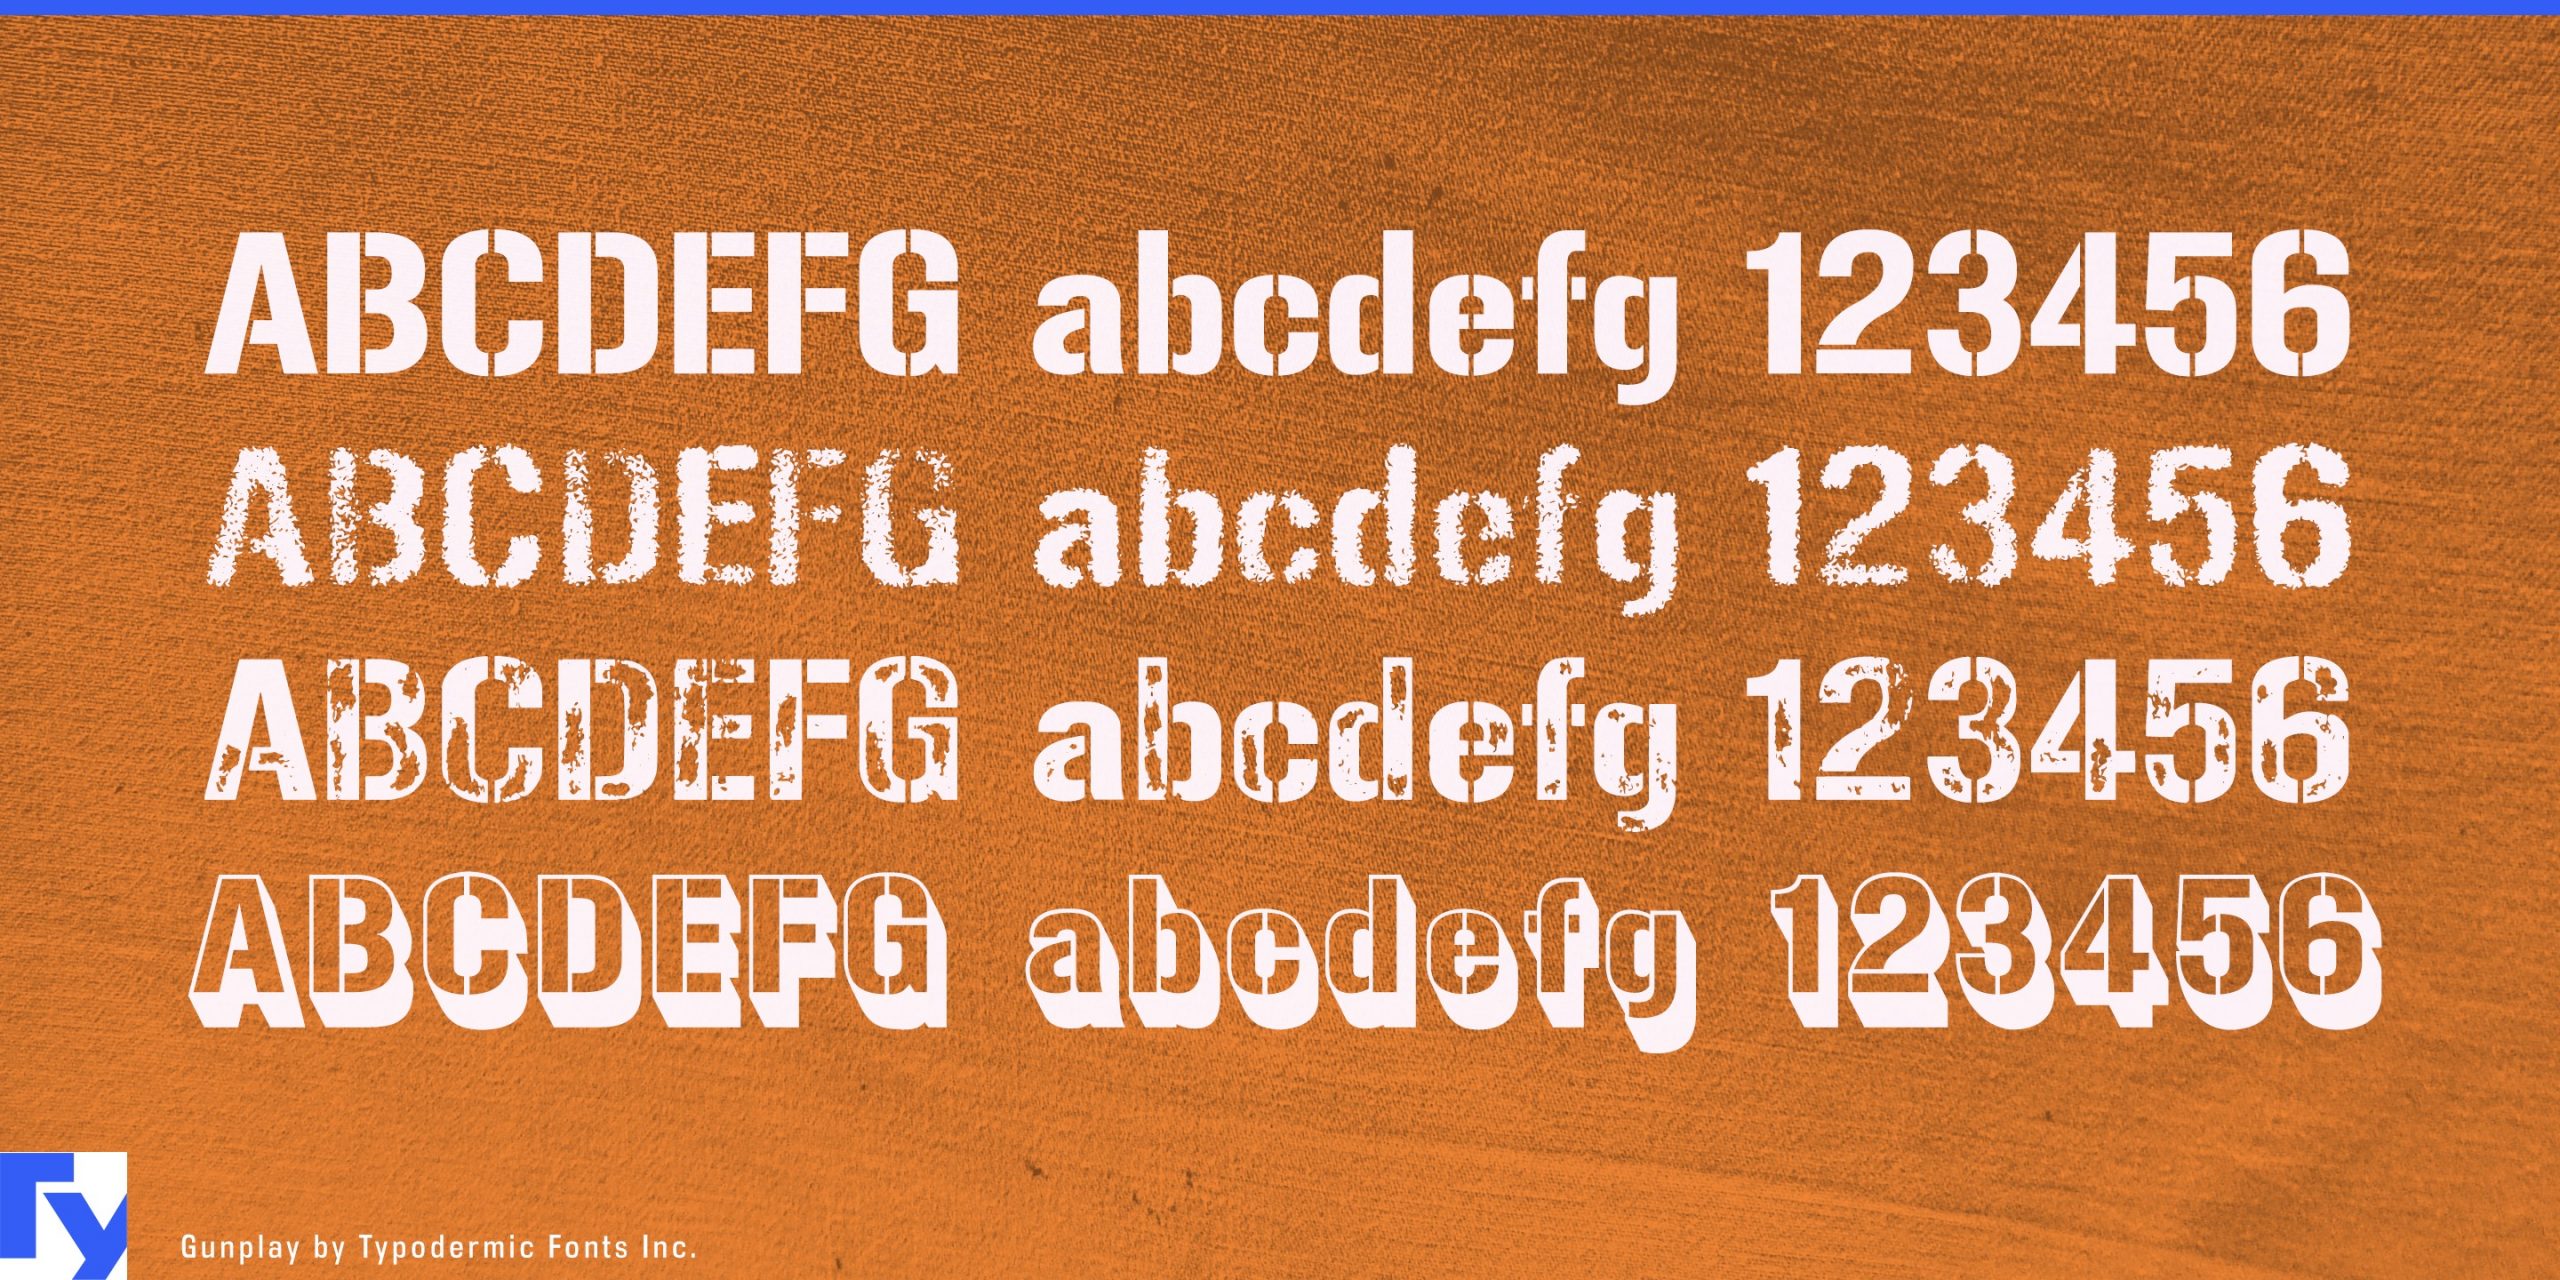 Flimsy Fonts, Begone: Elevate Your Designs with Gunplay Typeface